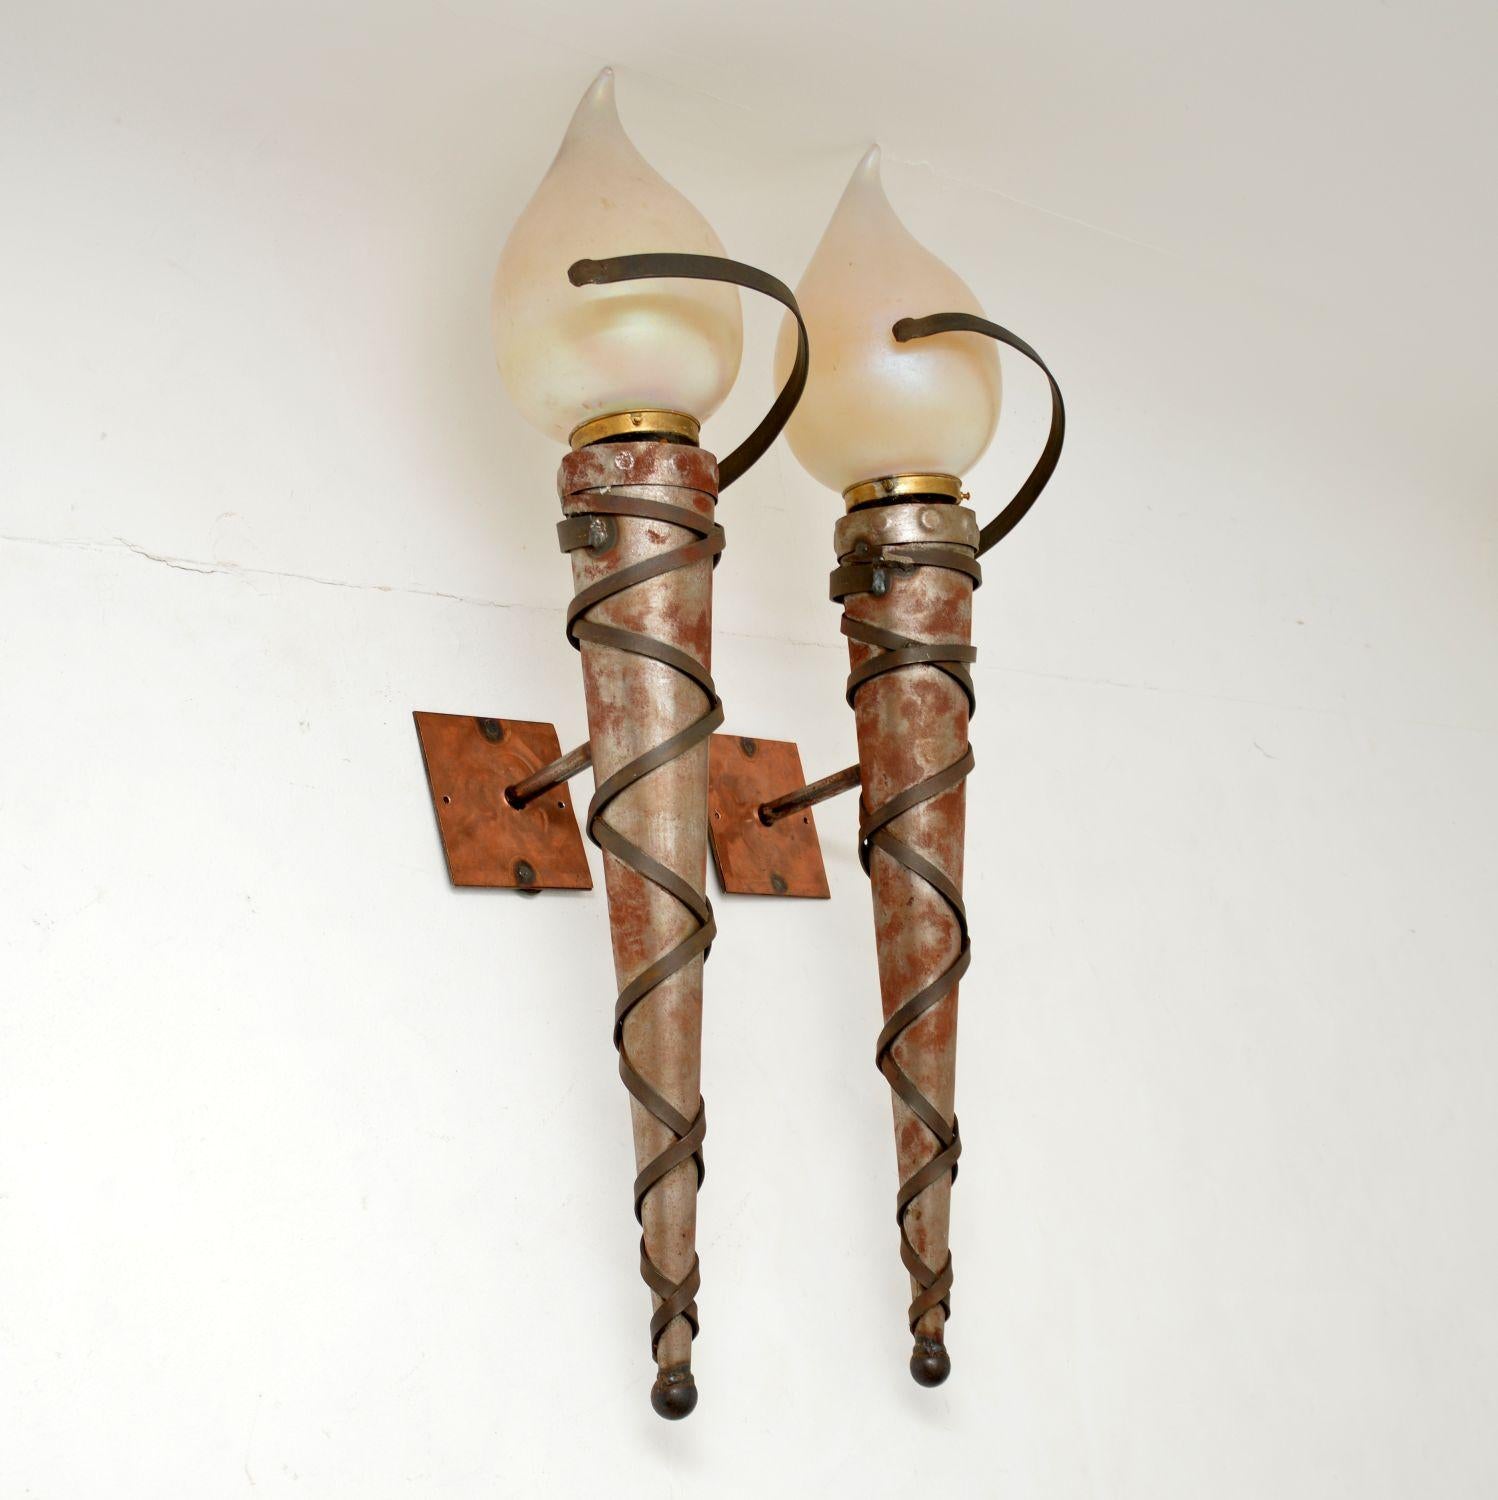 A very large, stunning and extremely unusual pair of original Art Deco Neoclassical wall sconce lamps. These were made in England & I would date them from around the 1920-1930’s period.

They have a fabulous design, and are extremely impressive.